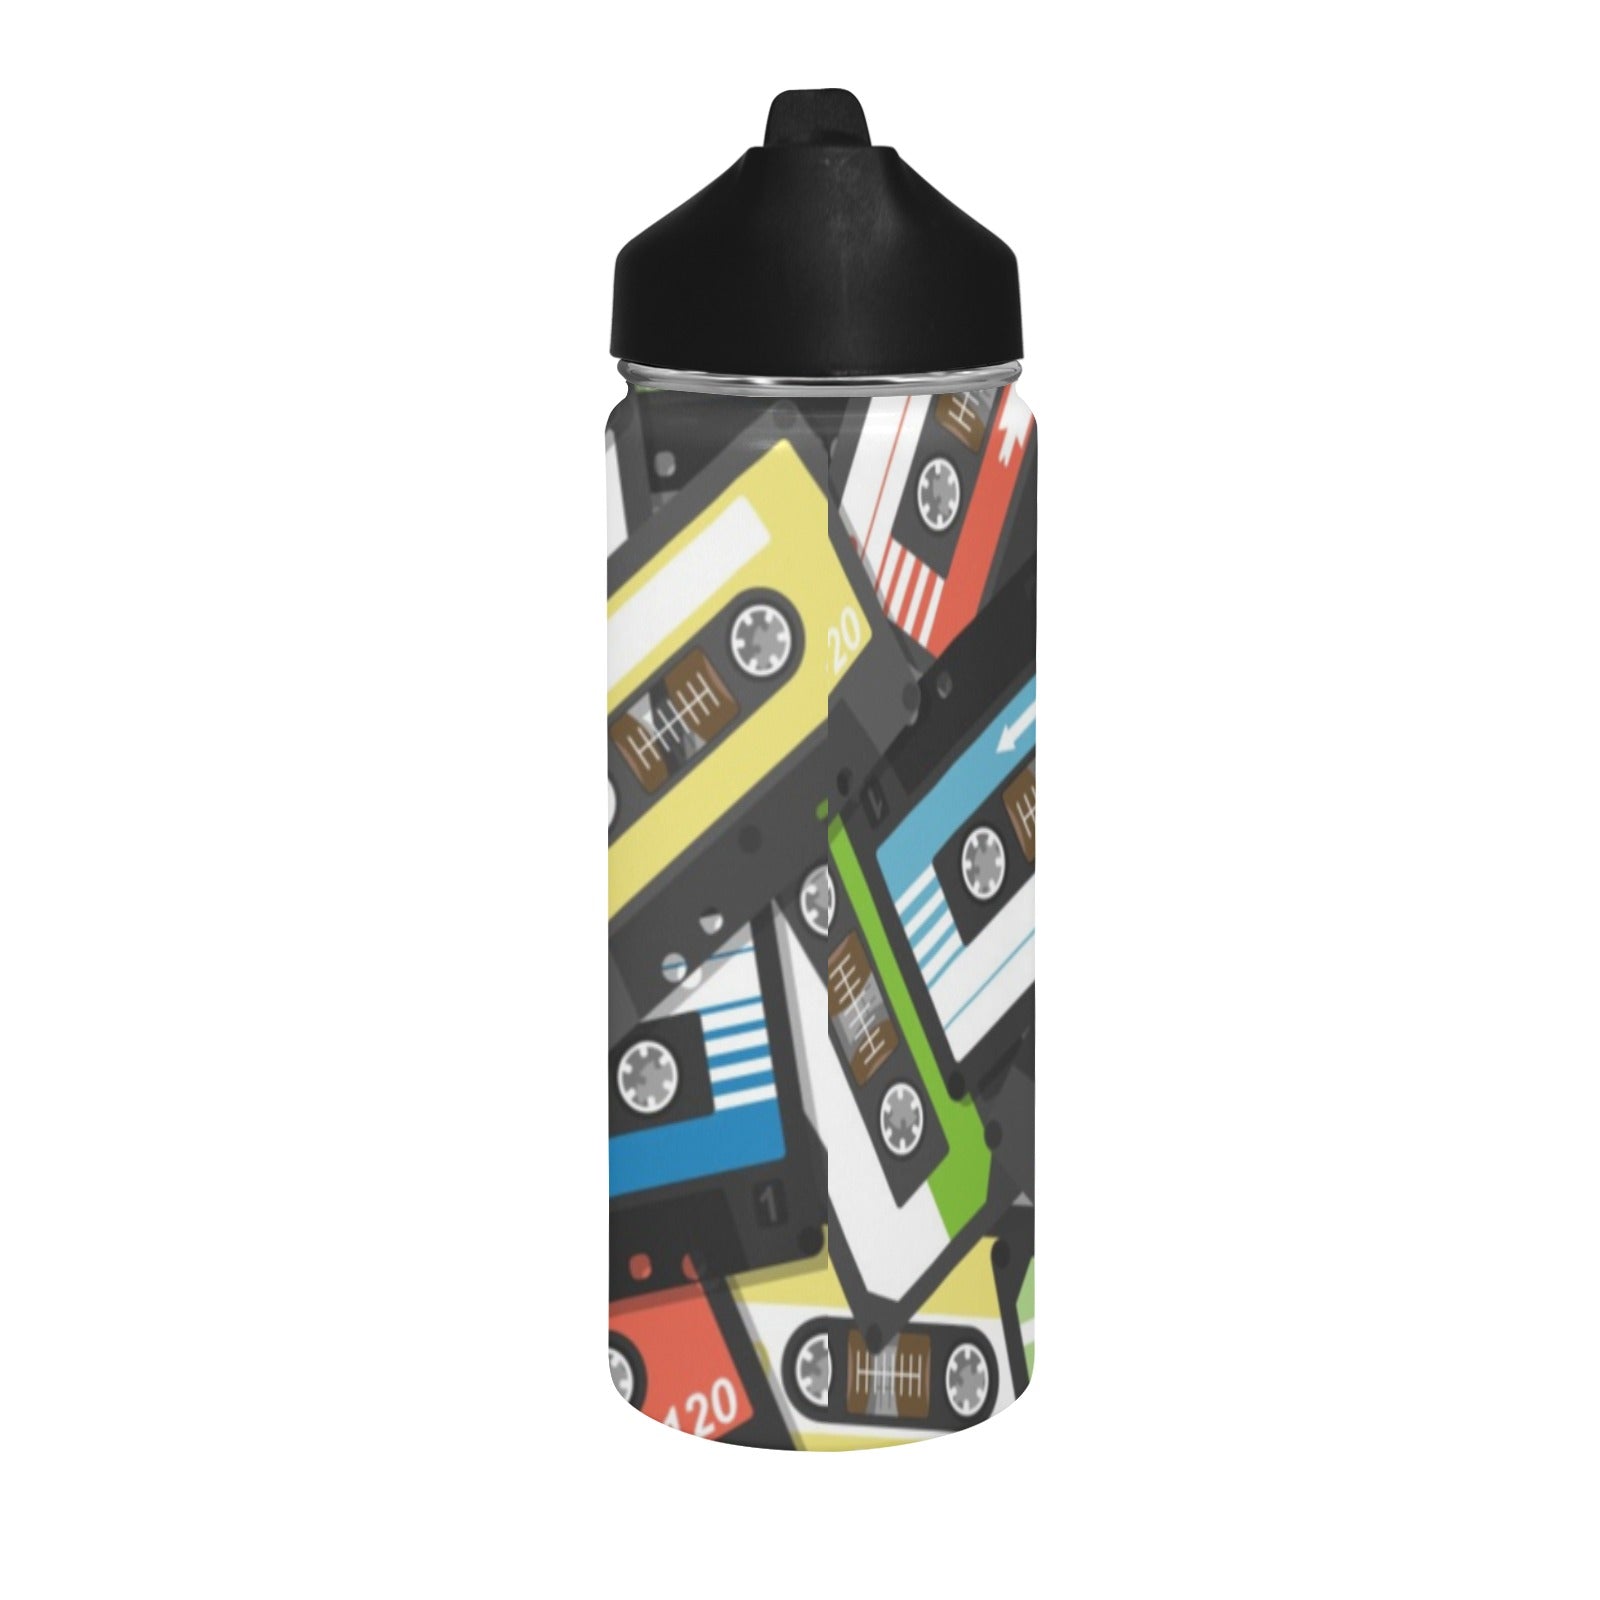 Cassette Tapes Insulated Water Bottle with Straw Lid (18 oz) Insulated Water Bottle with Straw Lid